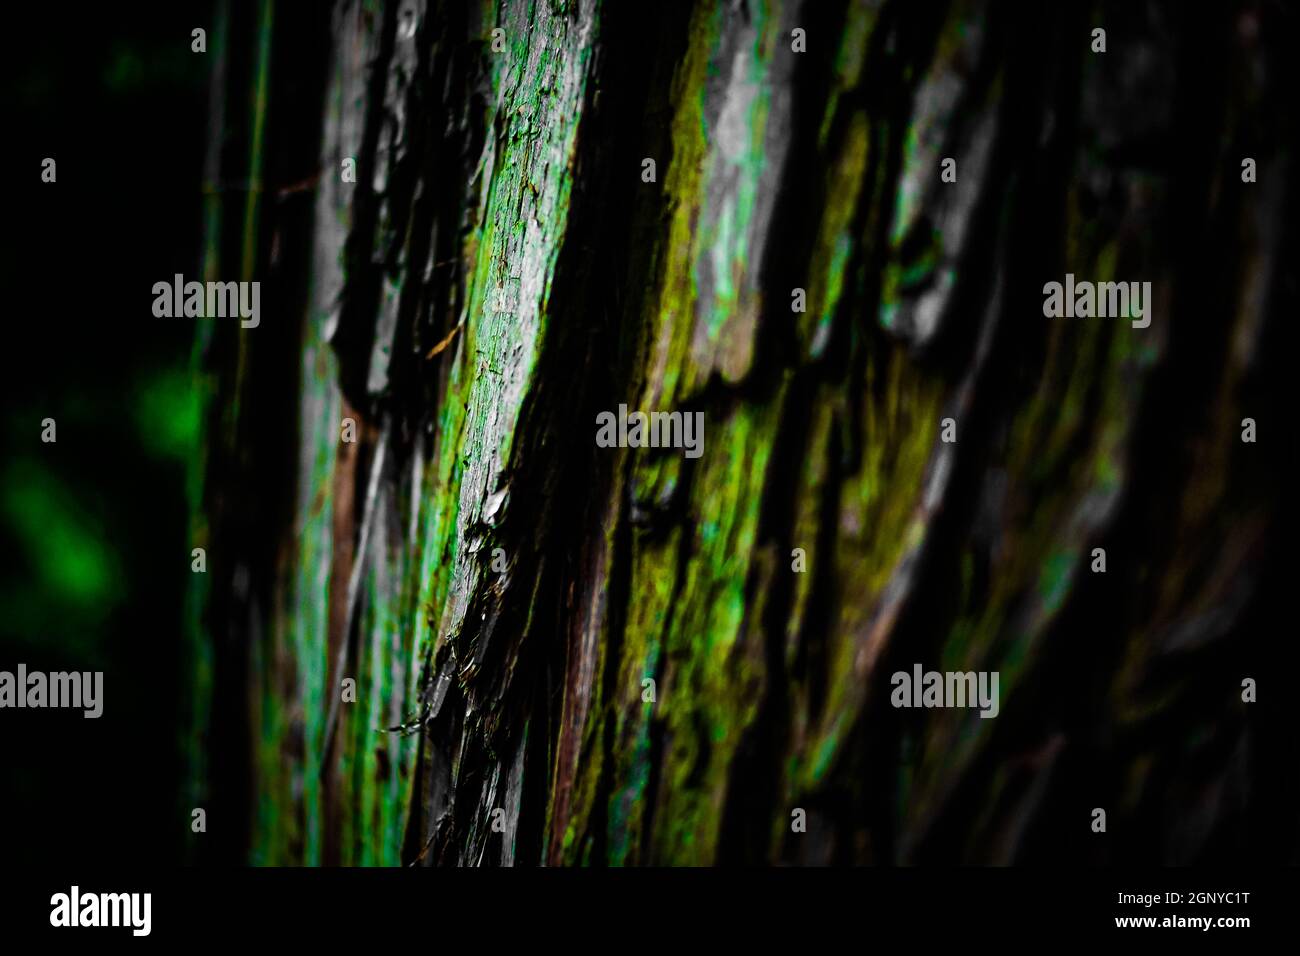 Of forest was dense image (Takao). Shooting Location: Hachioji, Tokyo Stock Photo